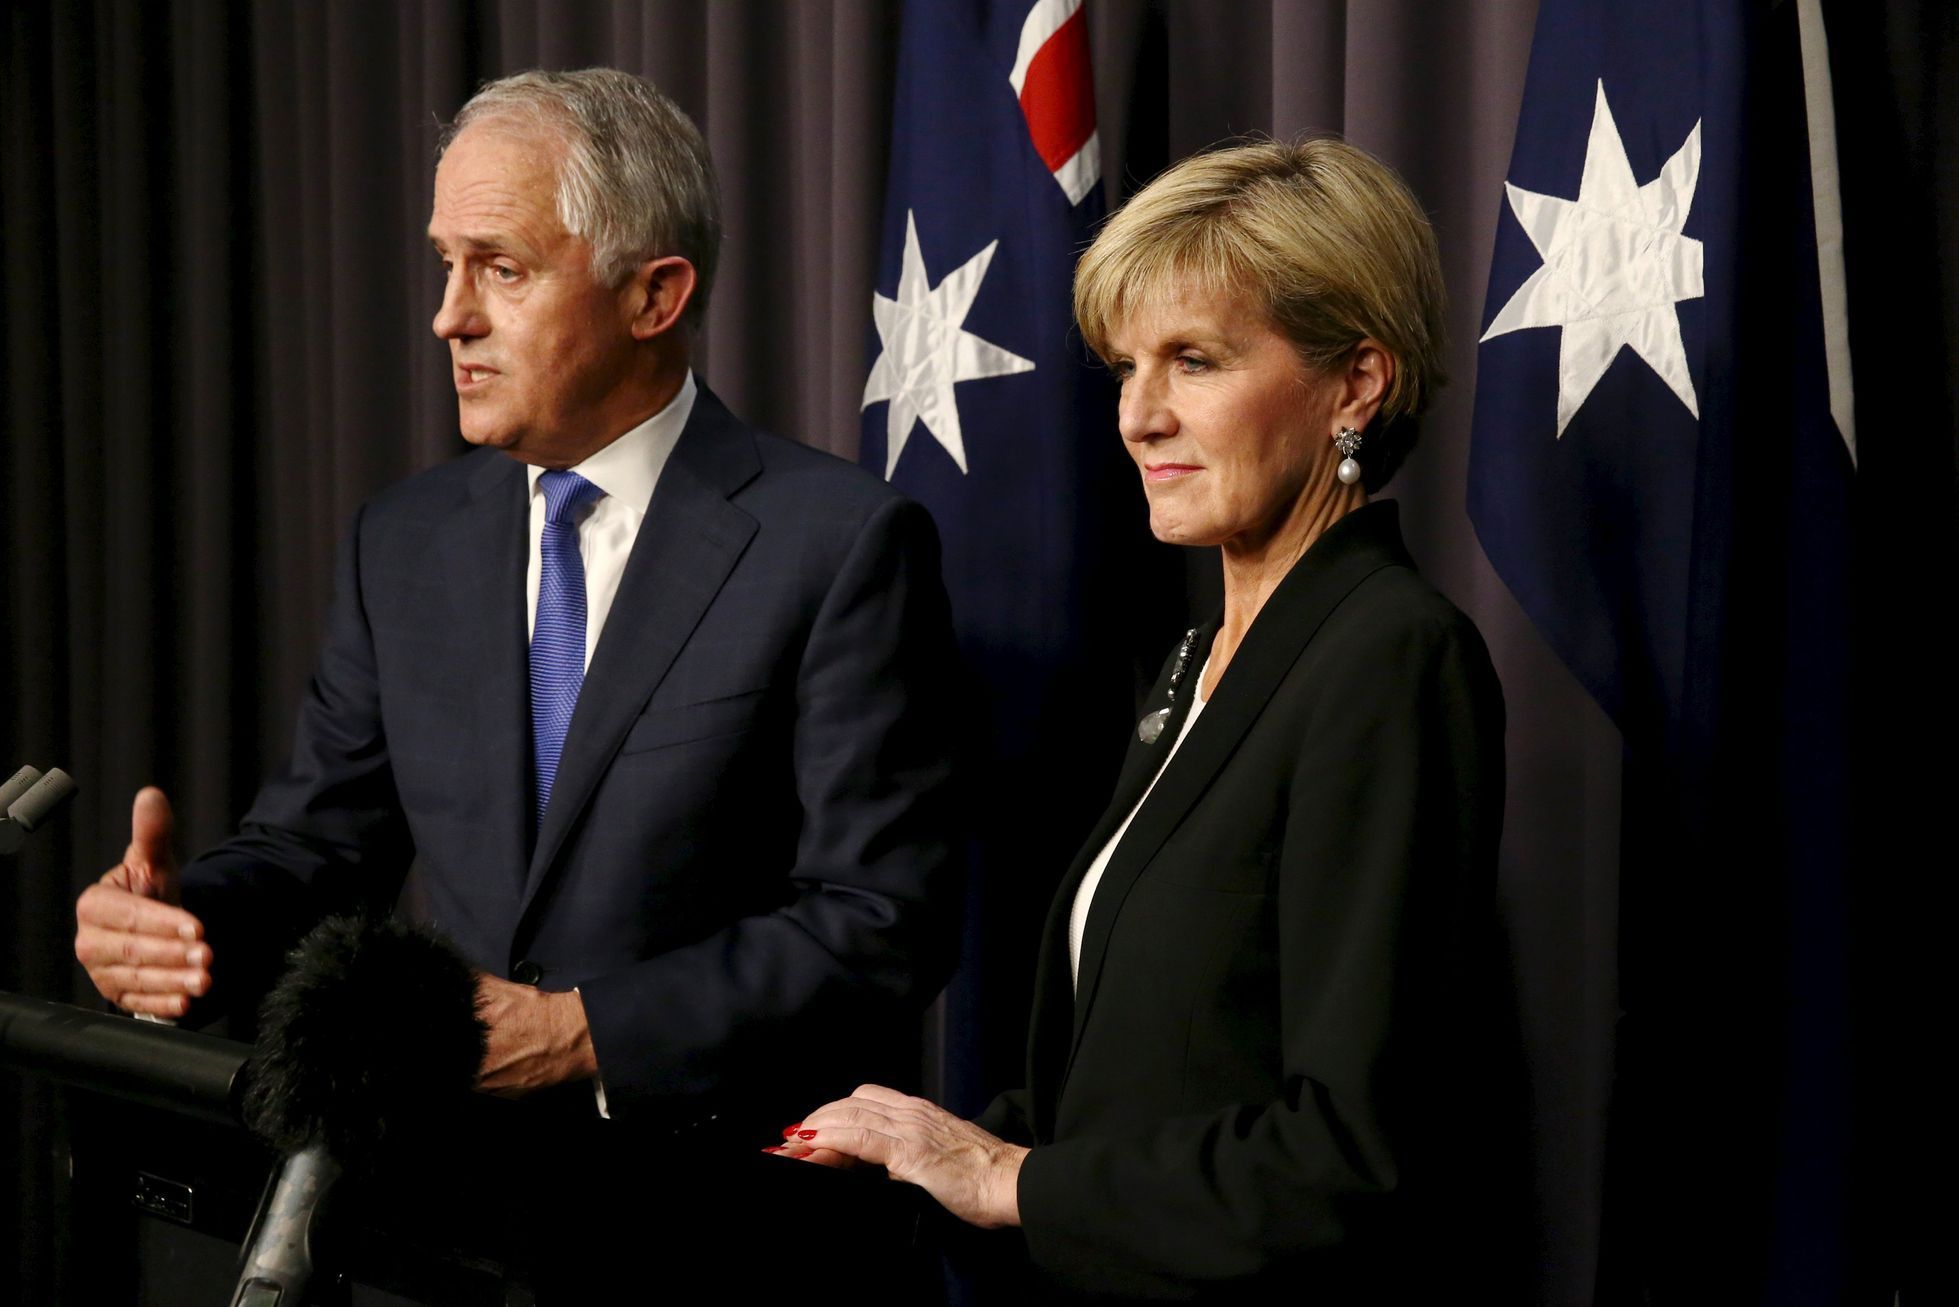 Malcolm Turnbull speaks to the media alongside Australian Foreign Minister Julie Bishop following in Canberra